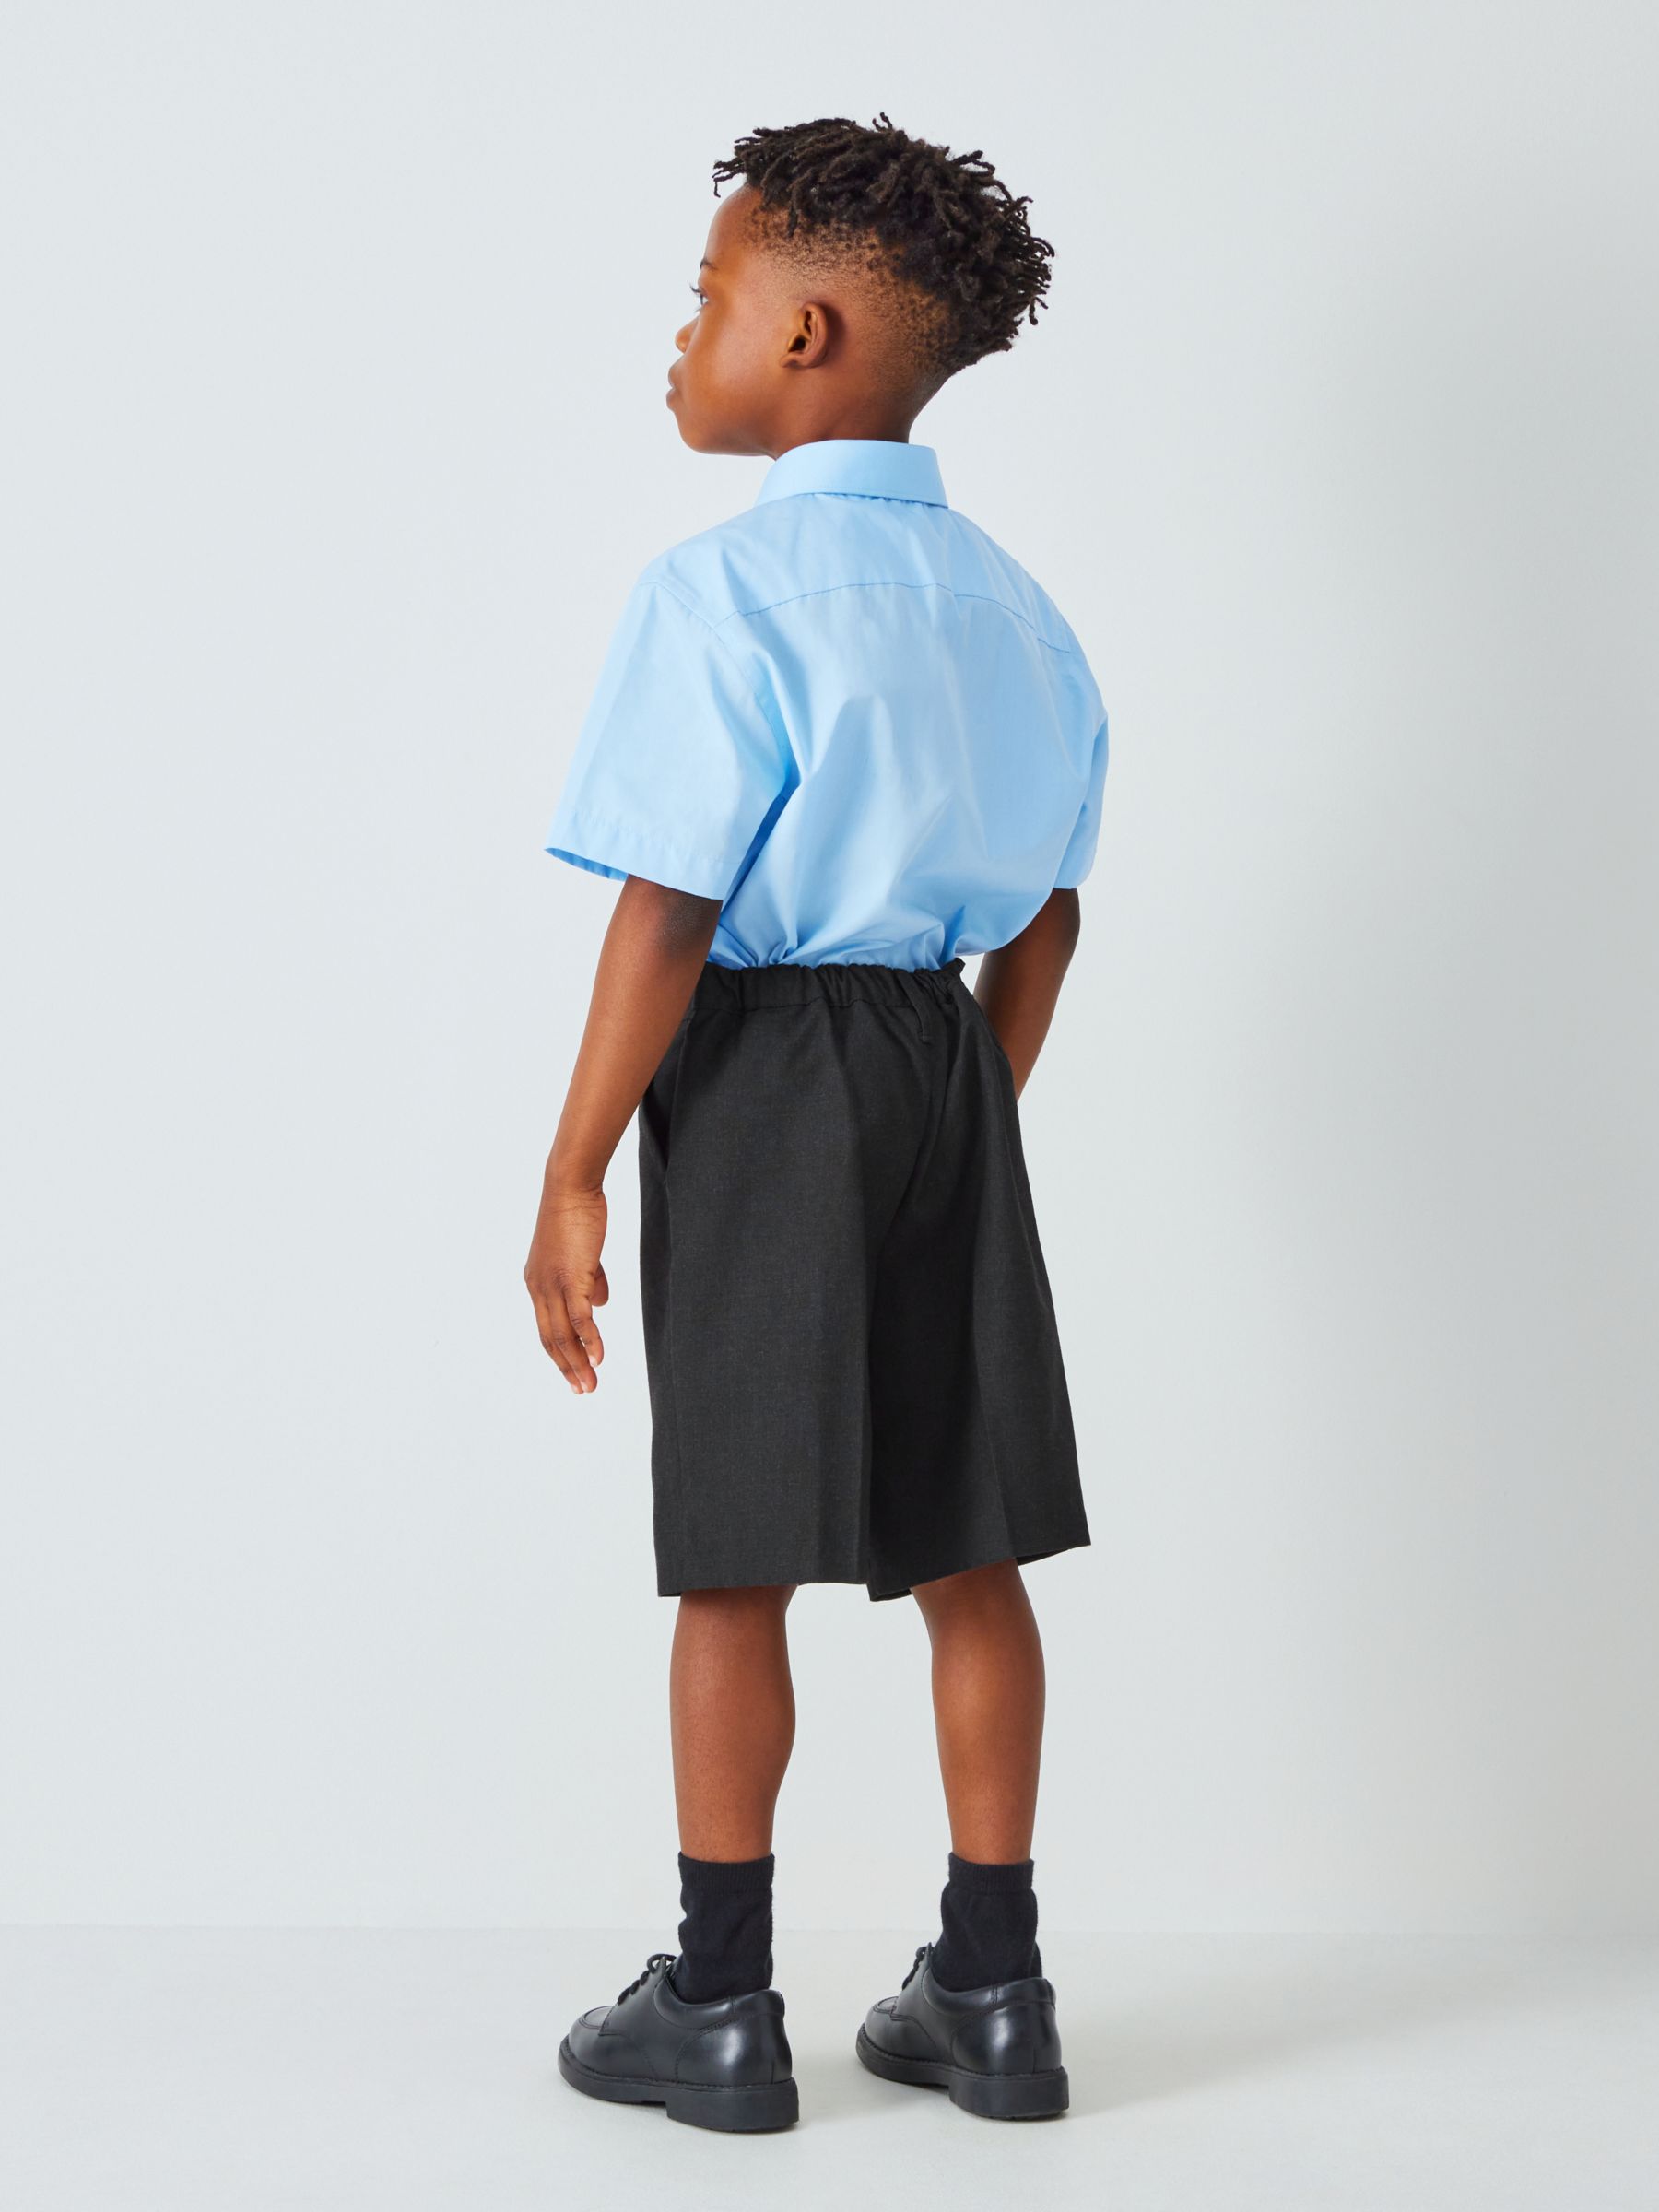 Buy John Lewis ANYDAY Kids' Adjustable Waist Stain Resistant School Shorts, Pack of 2, Grey Charcoal Online at johnlewis.com